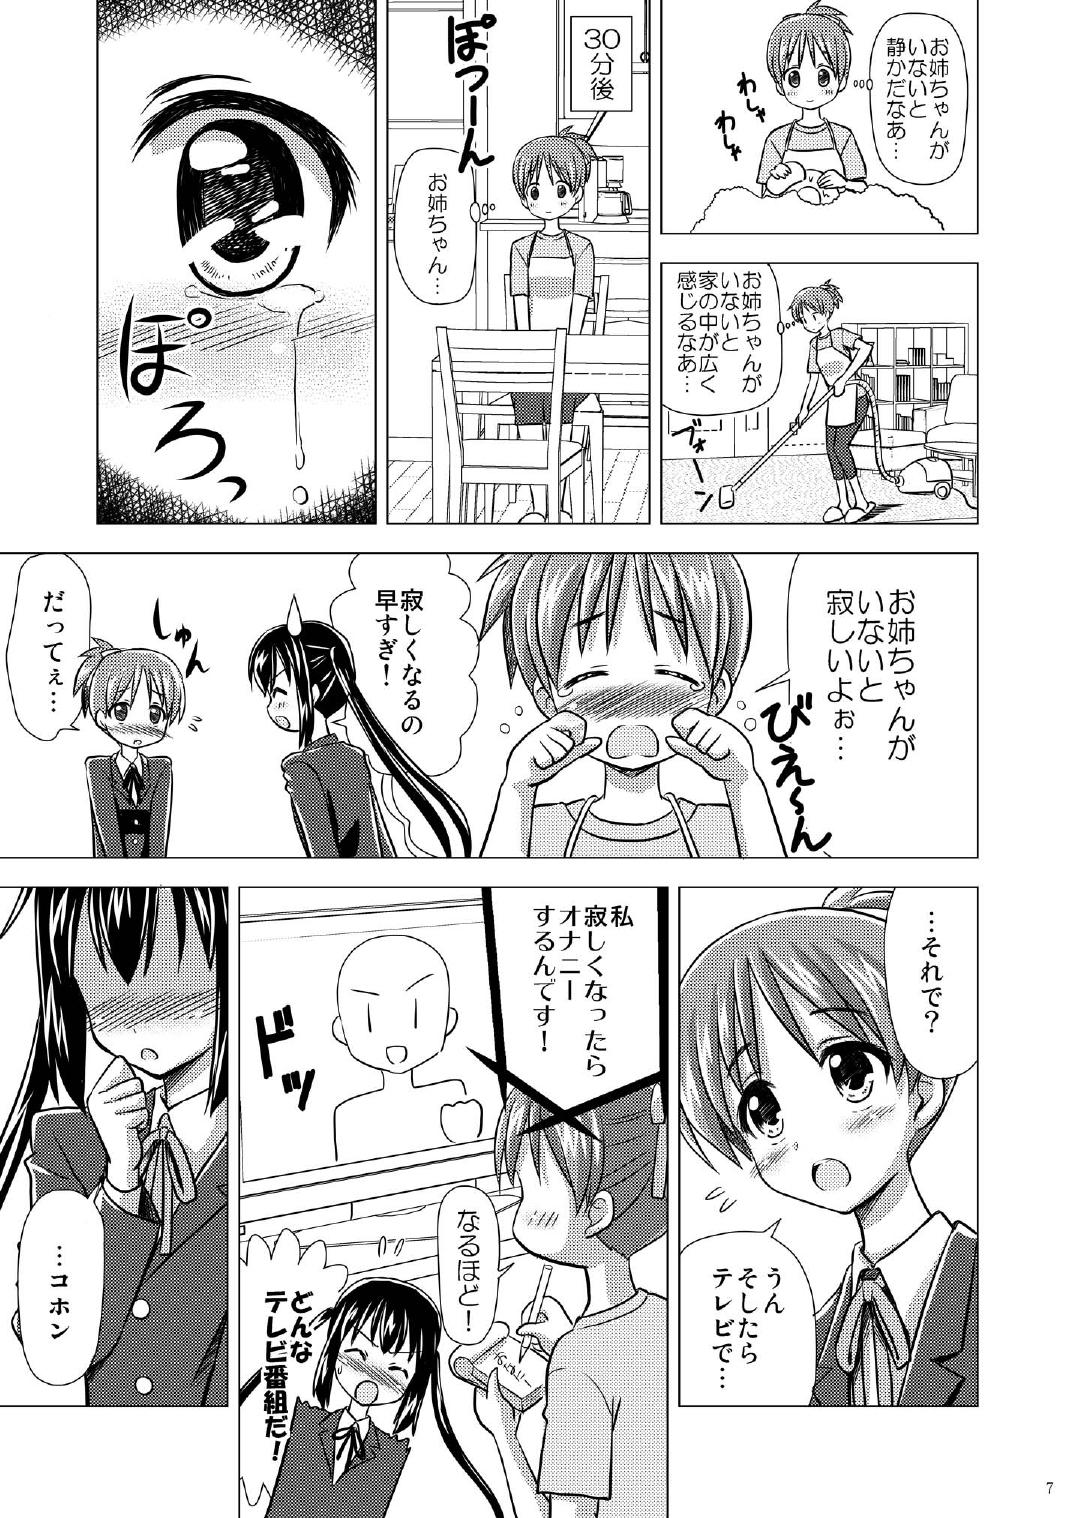 Spy Camera Houkago P Time PLUS - K on Cute - Page 8